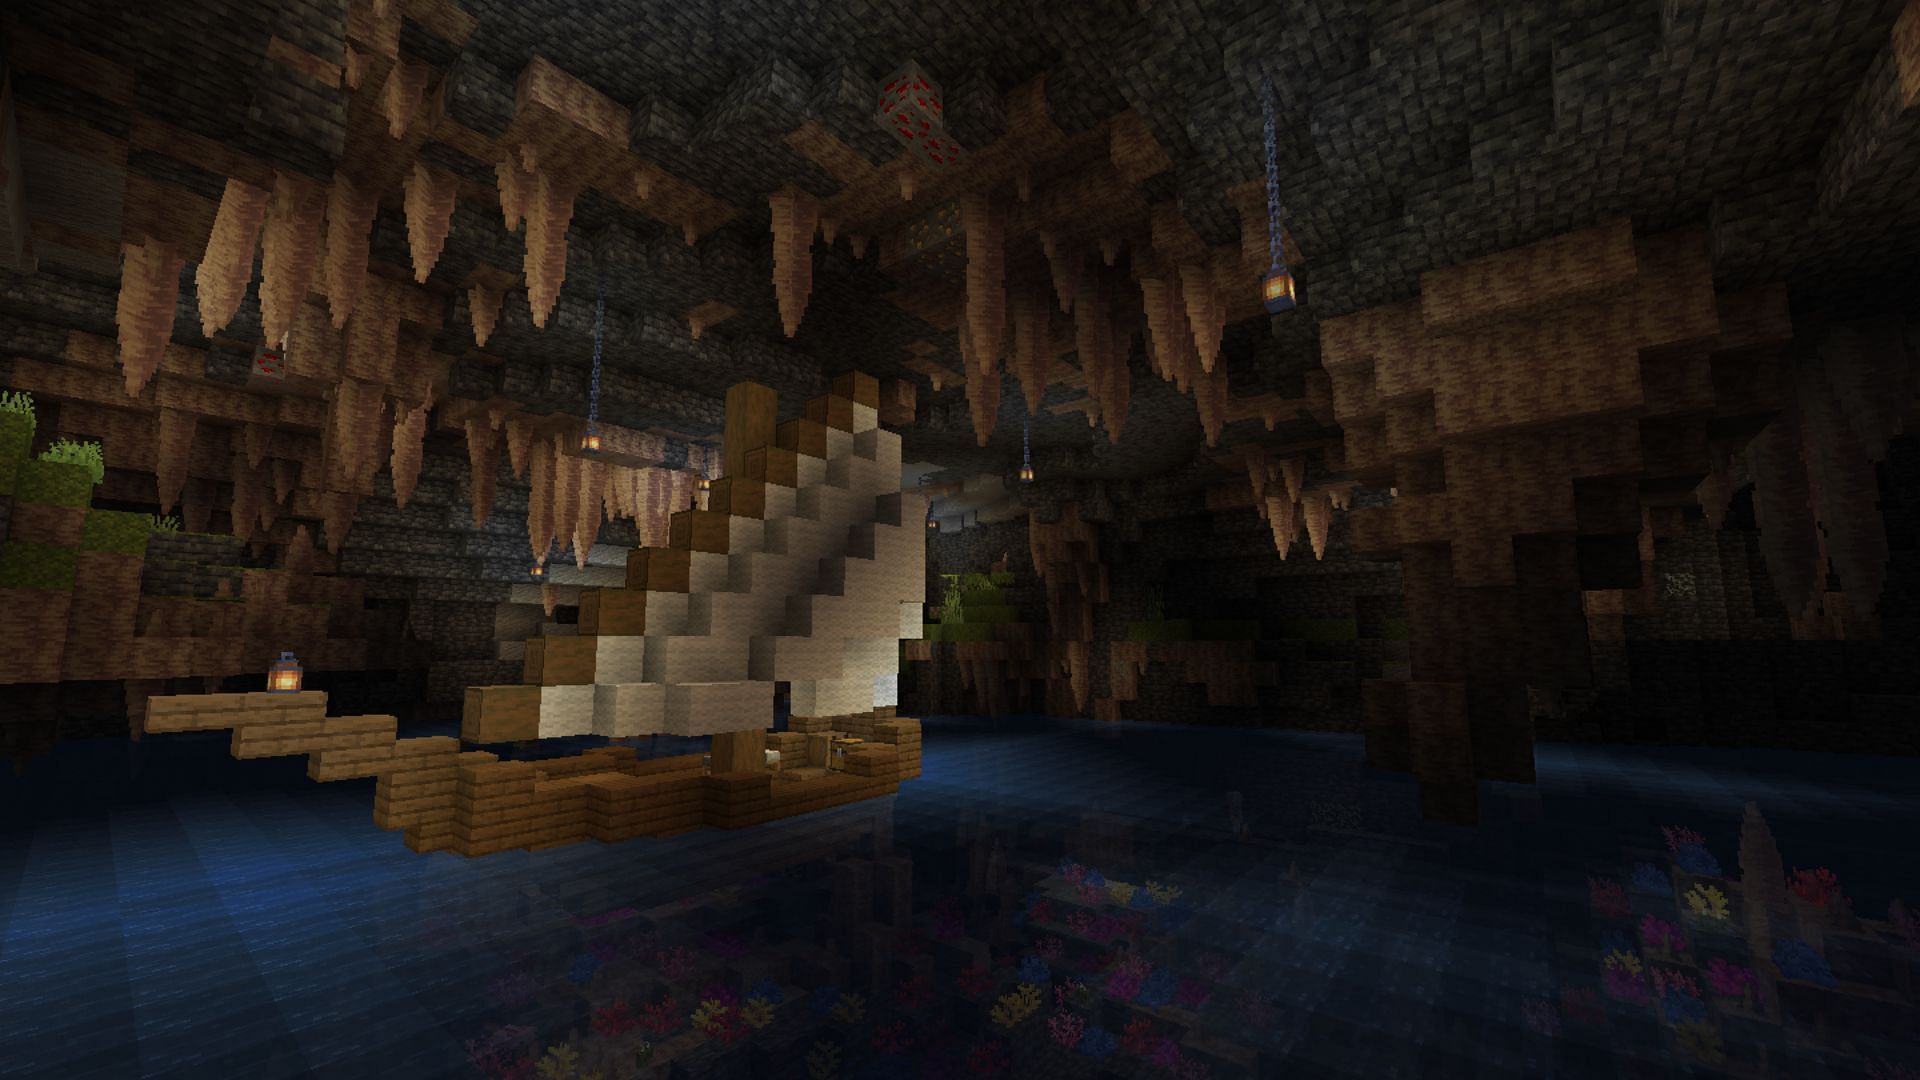 Ships can be built on aquifers inside caves in Minecraft (Image via Reddit / u/SillyNameHere002)